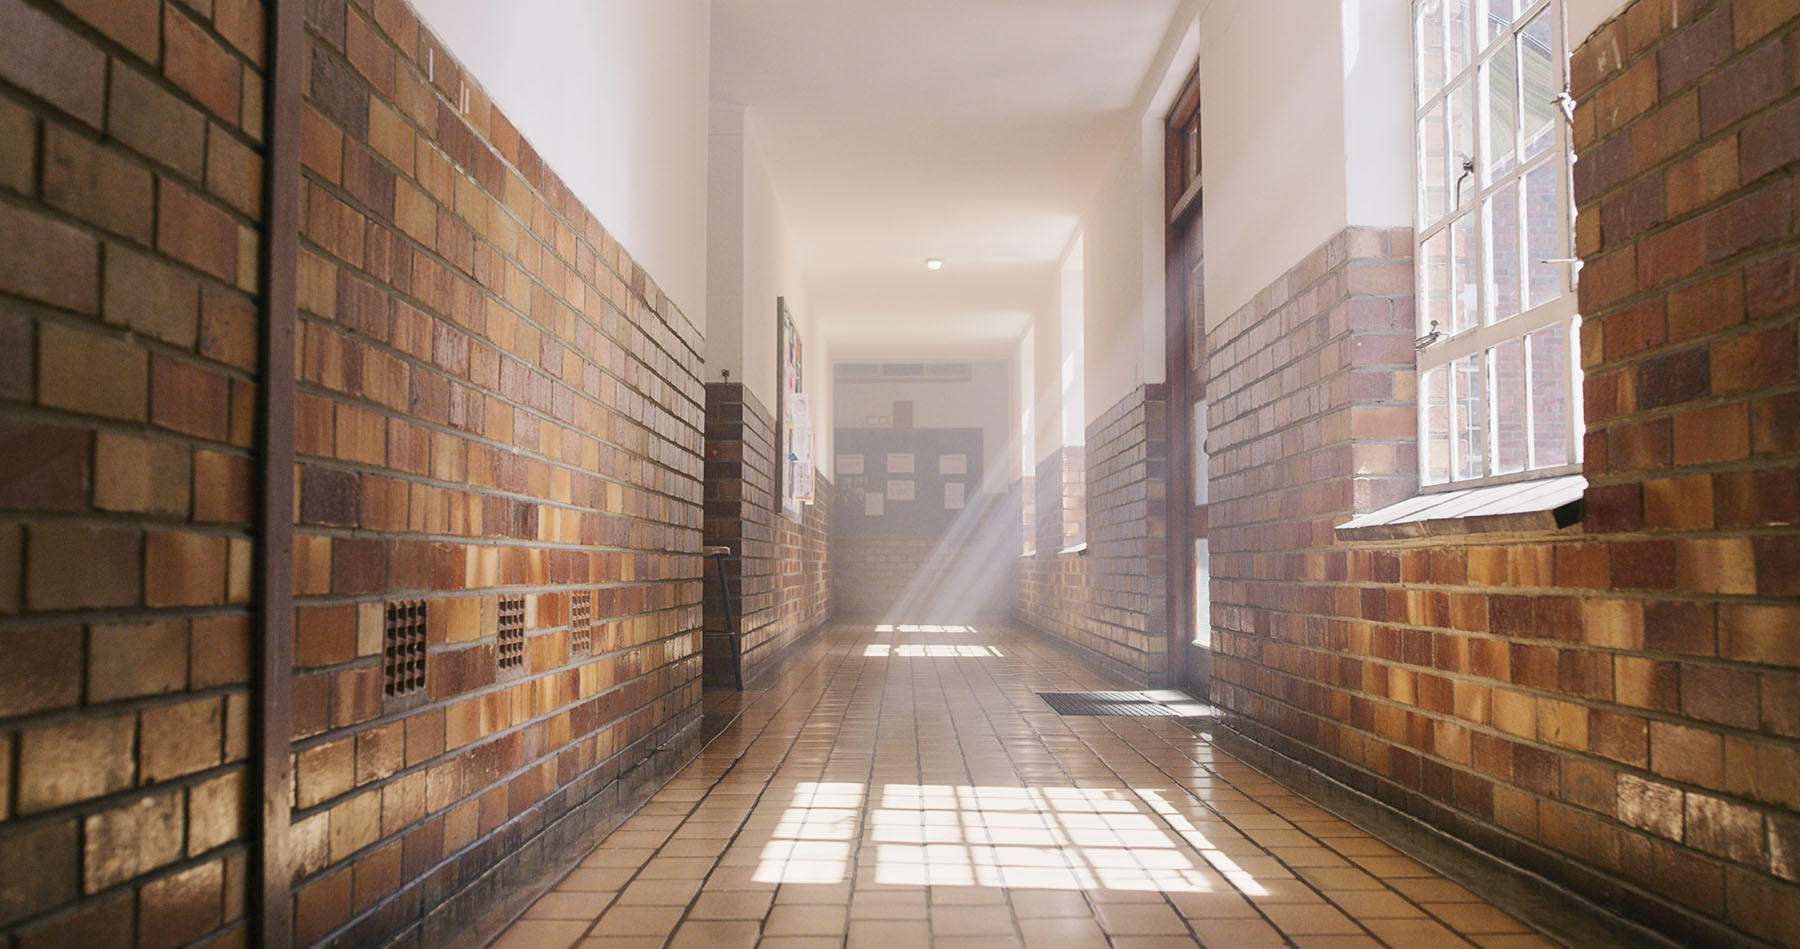 Light filters into a hallway through a window in an empty school.